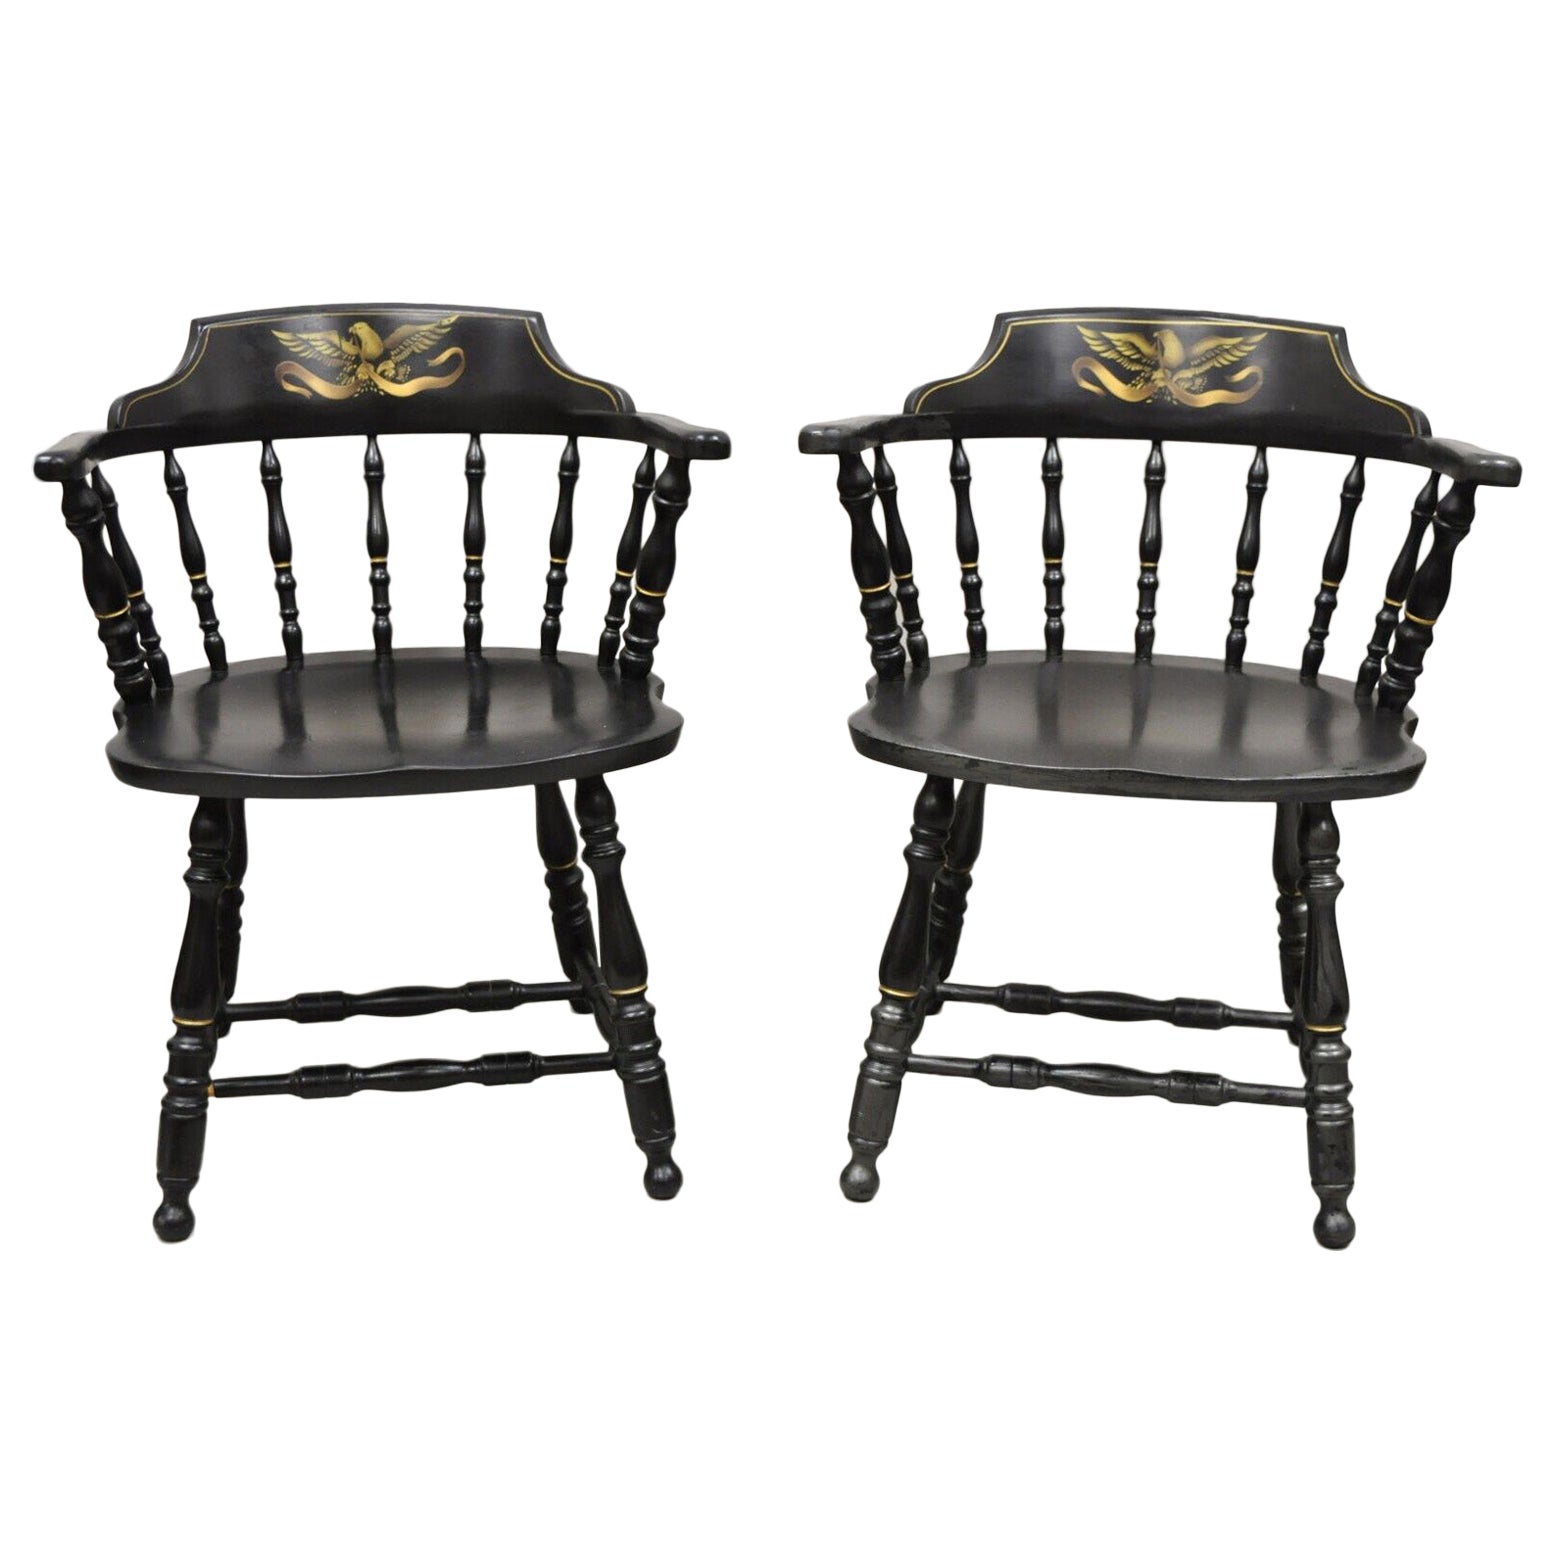 Vintage S. Bent & Bros Black Painted Eagle Colonial Style Pub Chairs, a Pair For Sale